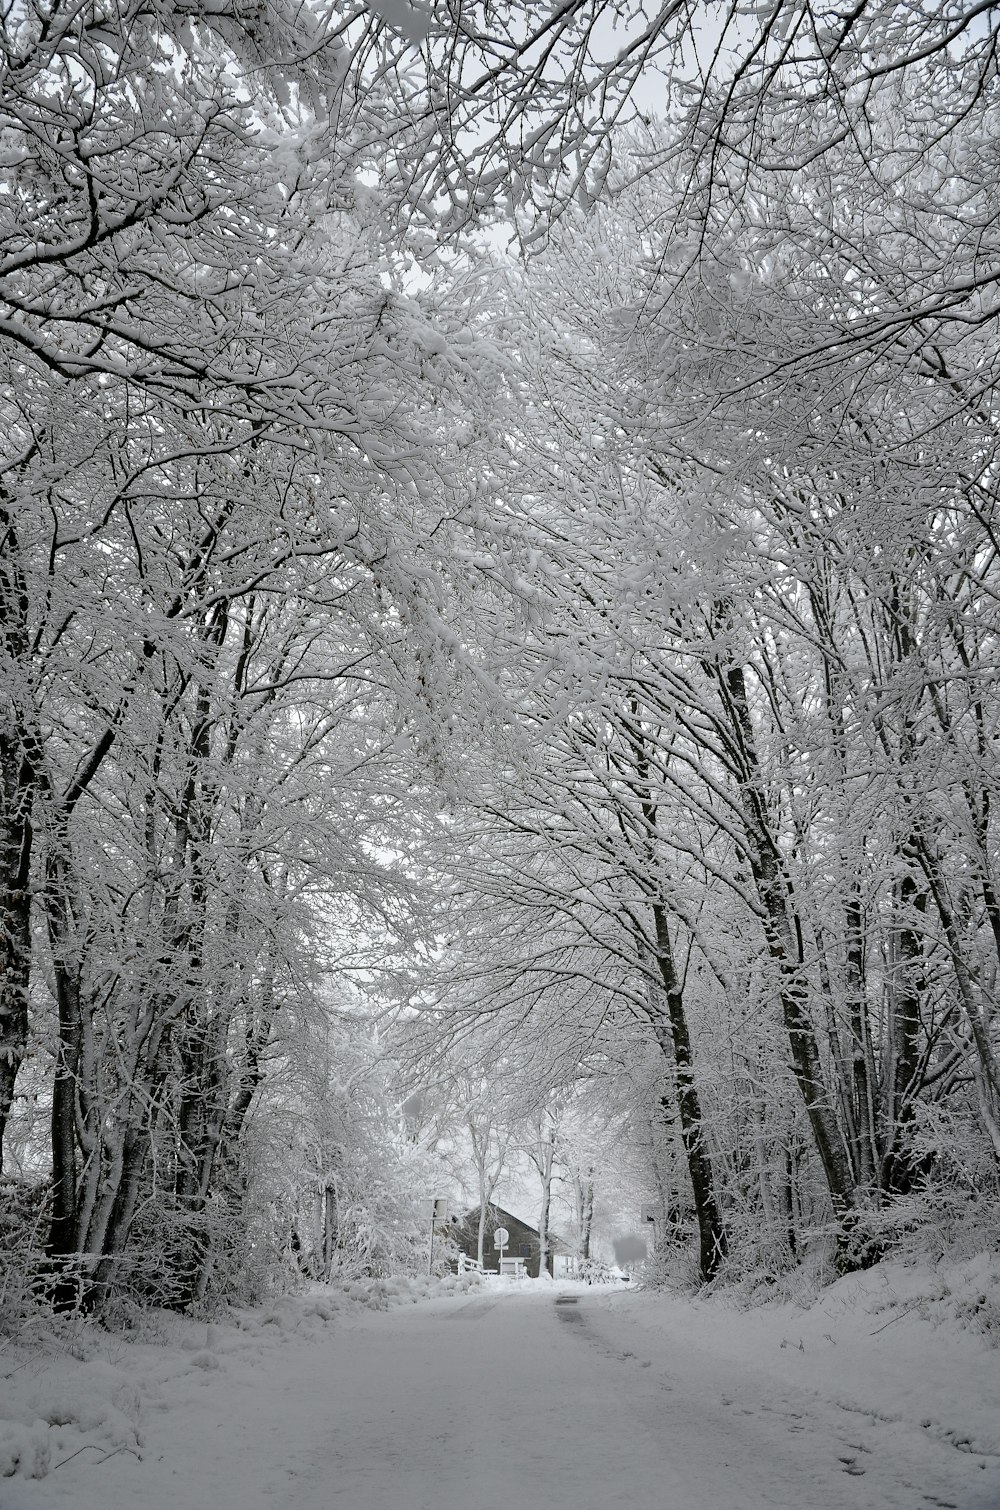 a snow covered road with trees and a house in the distance